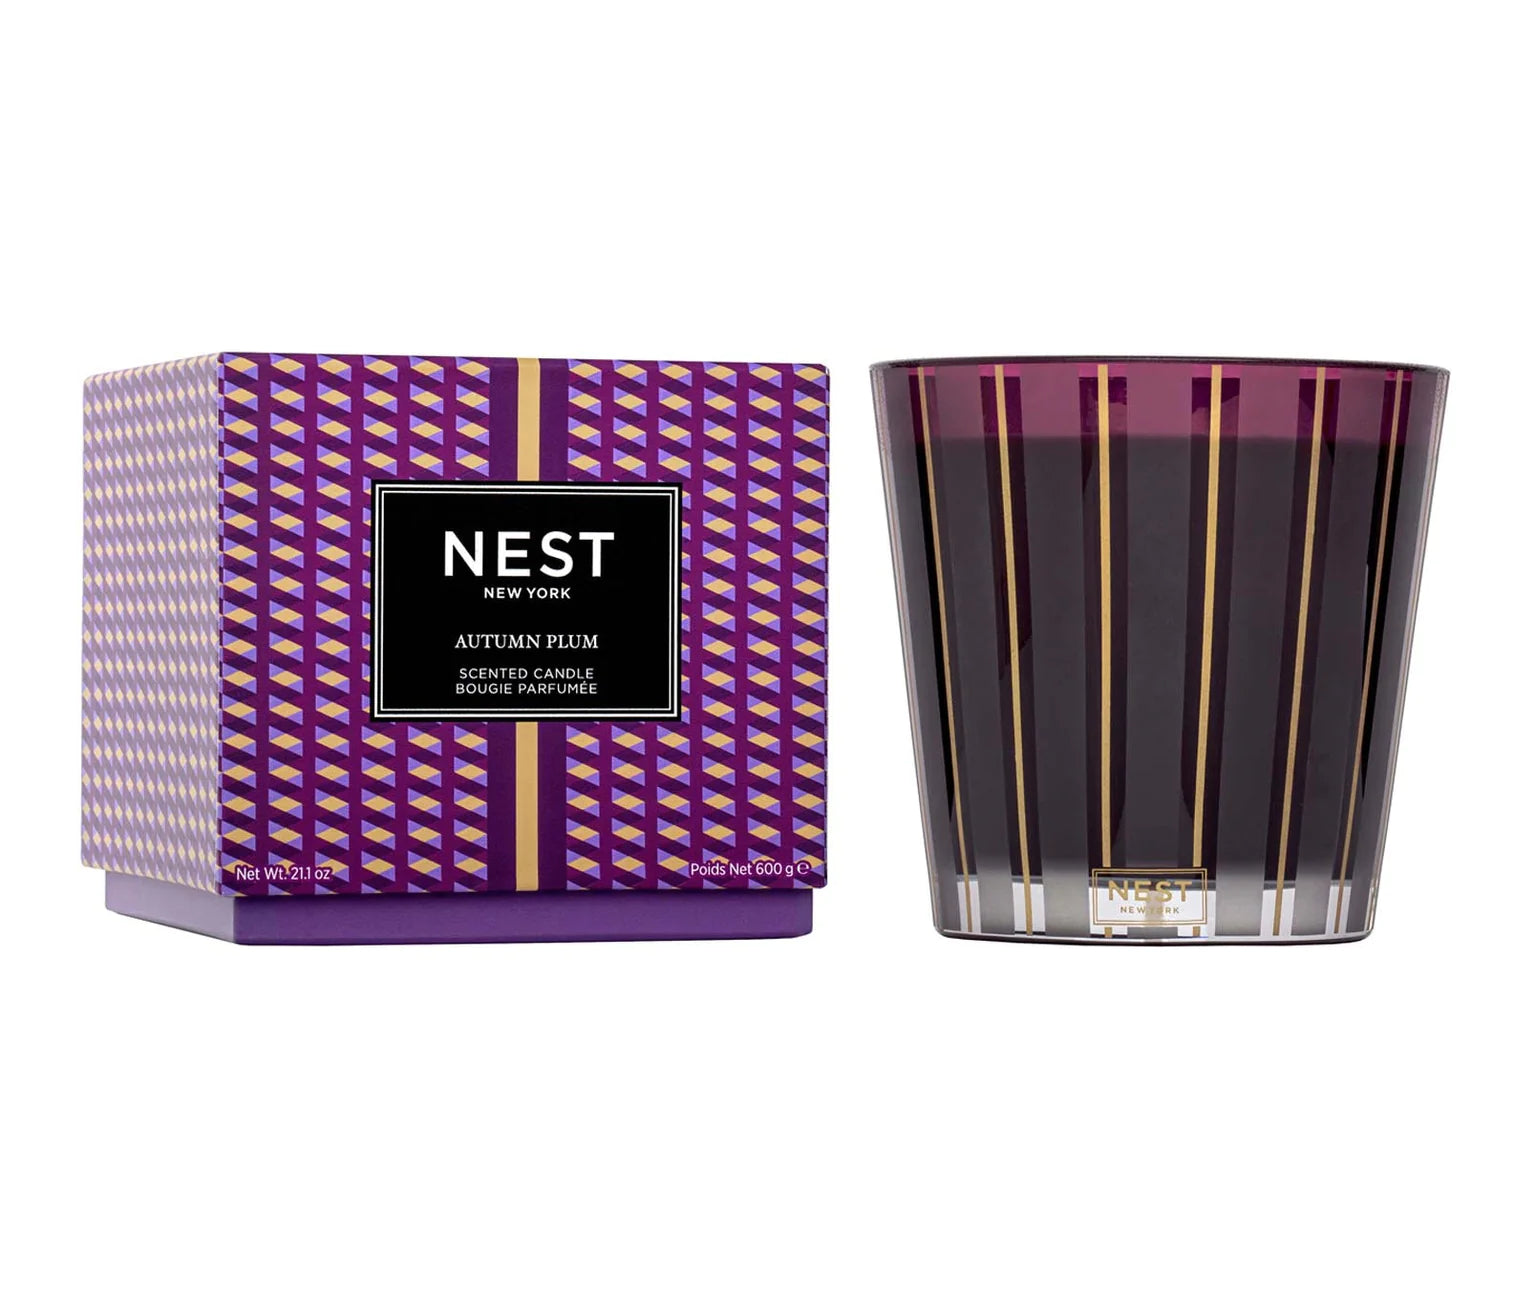 NEST 3 Wick 21.1oz Candle